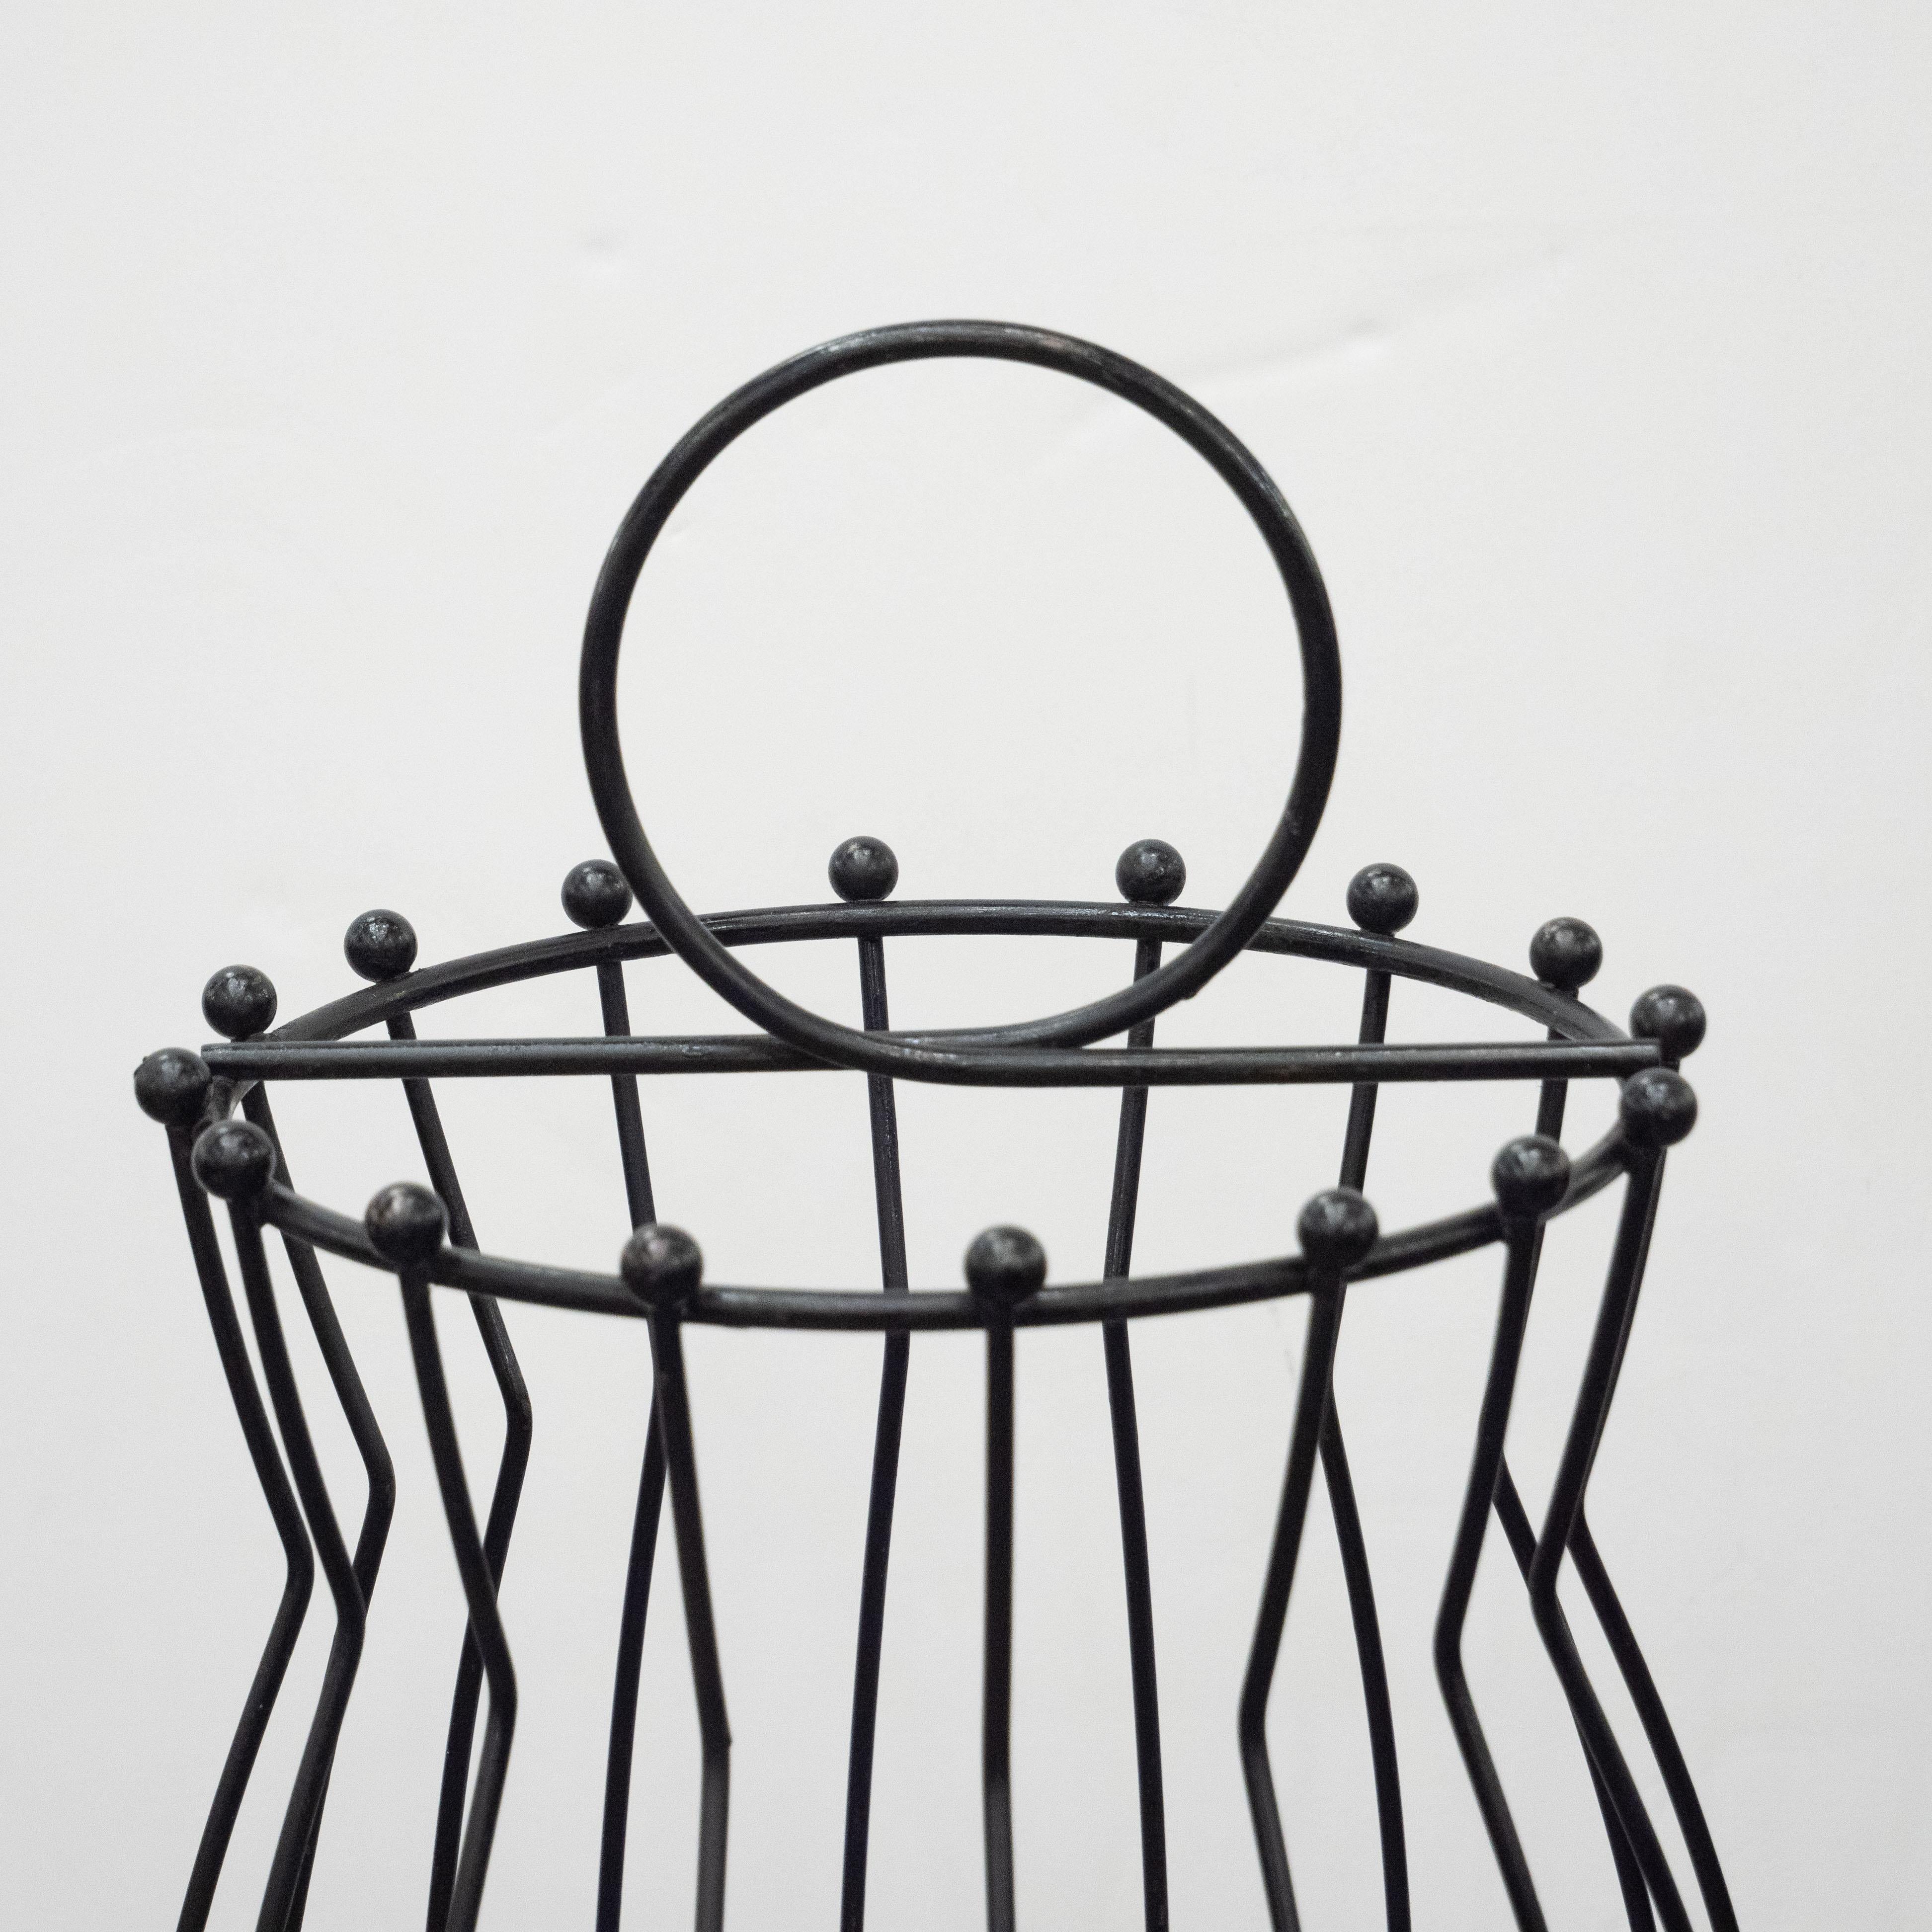 This sophisticated umbrella holder was realized in France, circa 1960. It features a circular base with raised sides from which bowed cylindrical supports ascend tapering in at the neck before expanding outwards again to the circular top. Each of